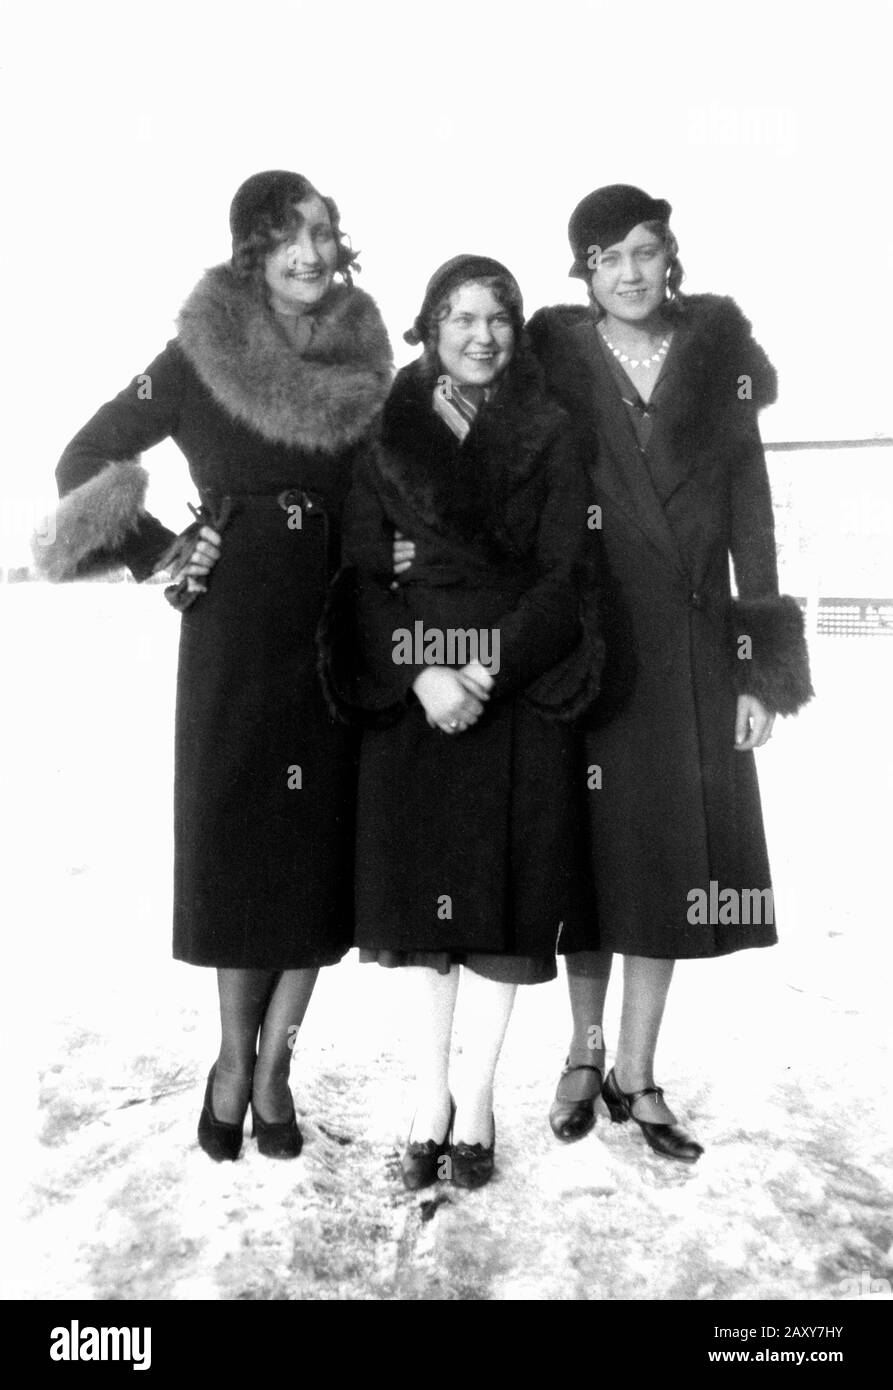 Three fashionable women brave the snow and ice to pose for portrait, ca. 1928. Stock Photo